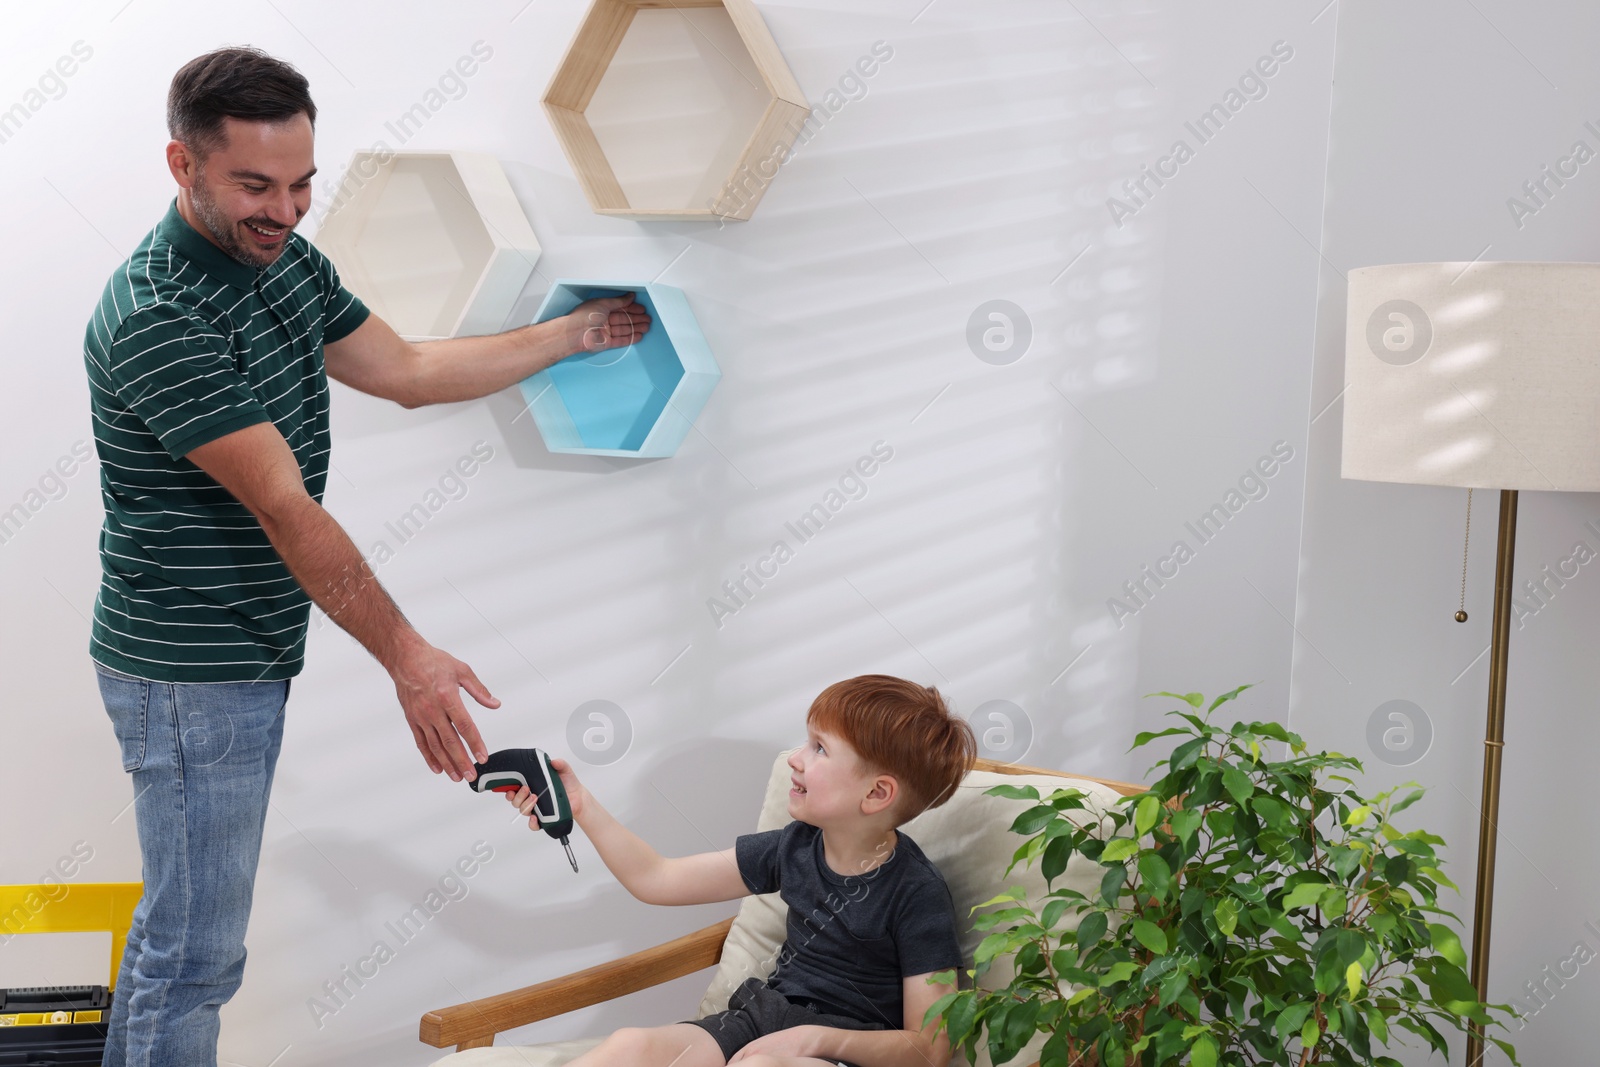 Photo of Son giving tool to father at home. Repair work